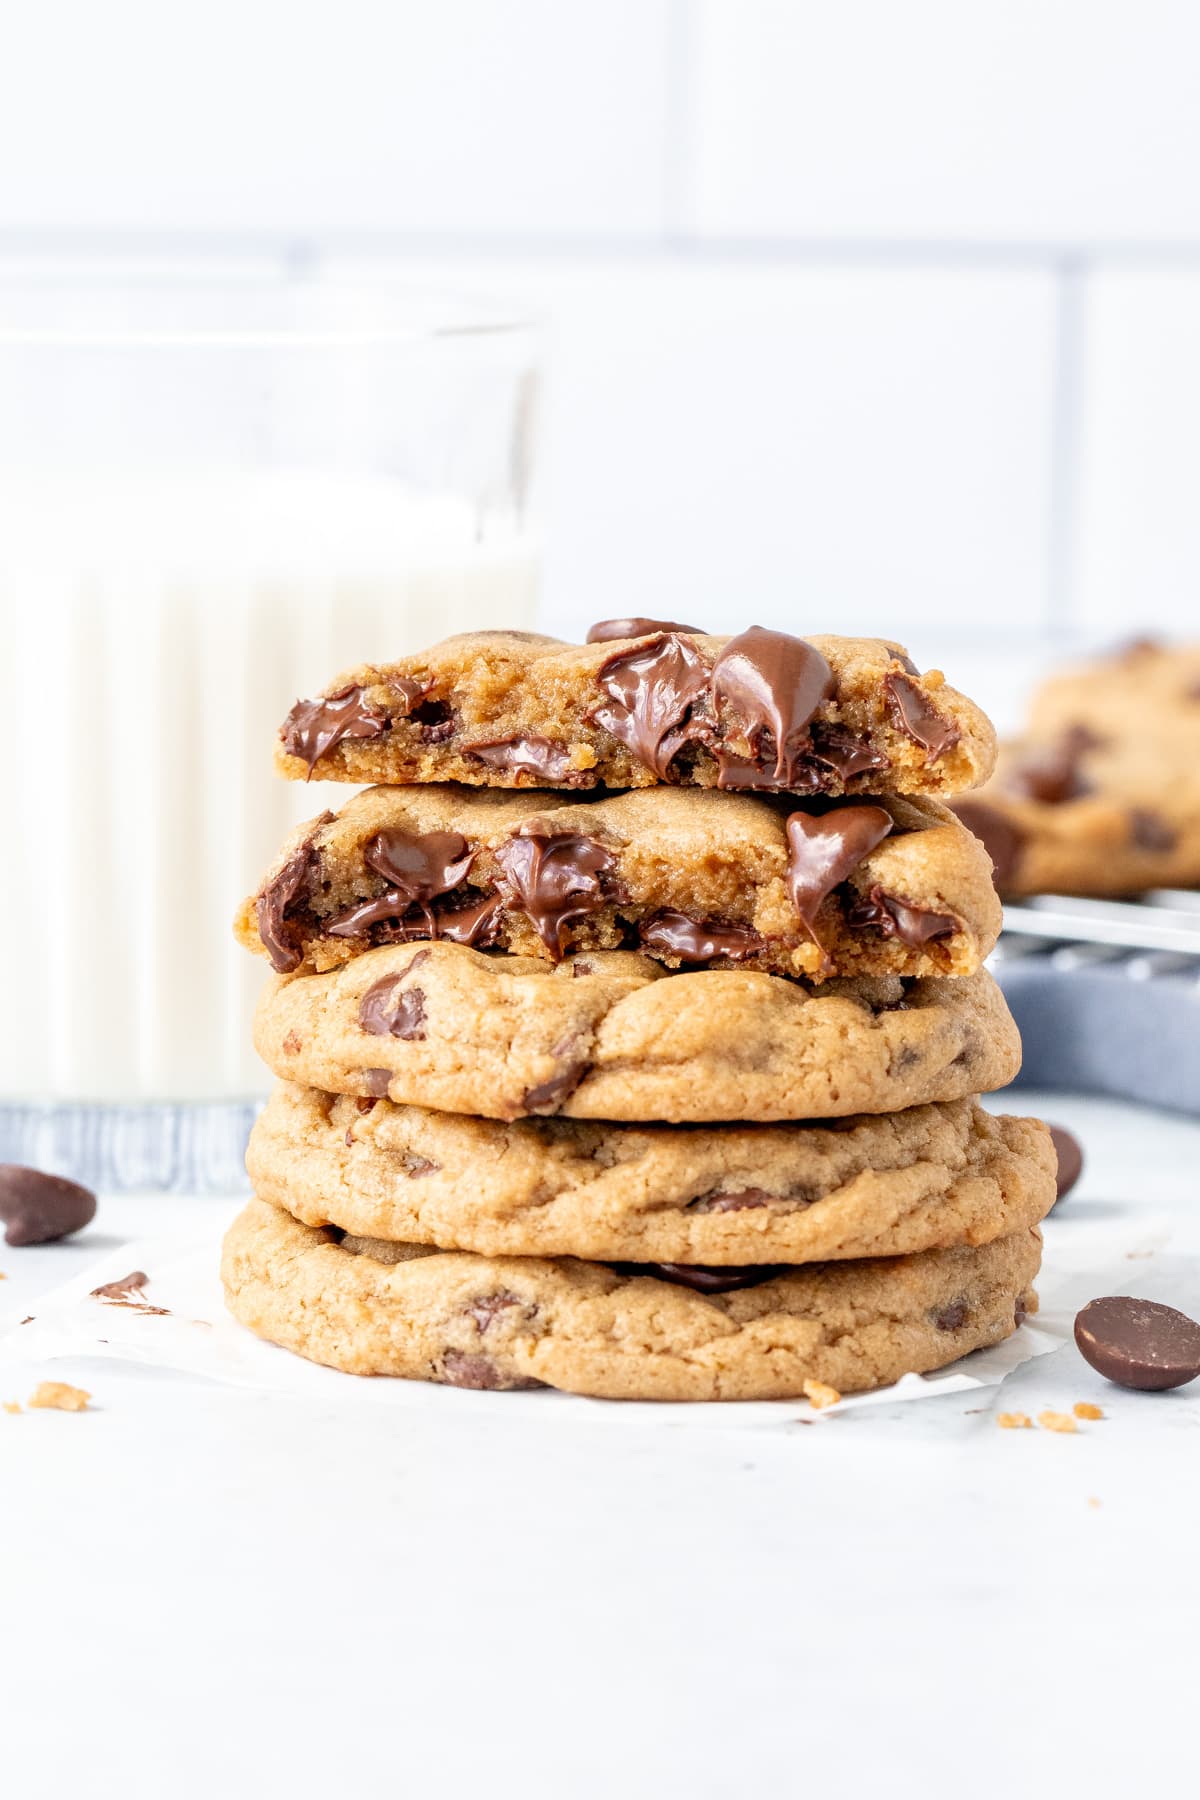 Stack of cream cheese chocolate chip cookies with top cookie broken in half.